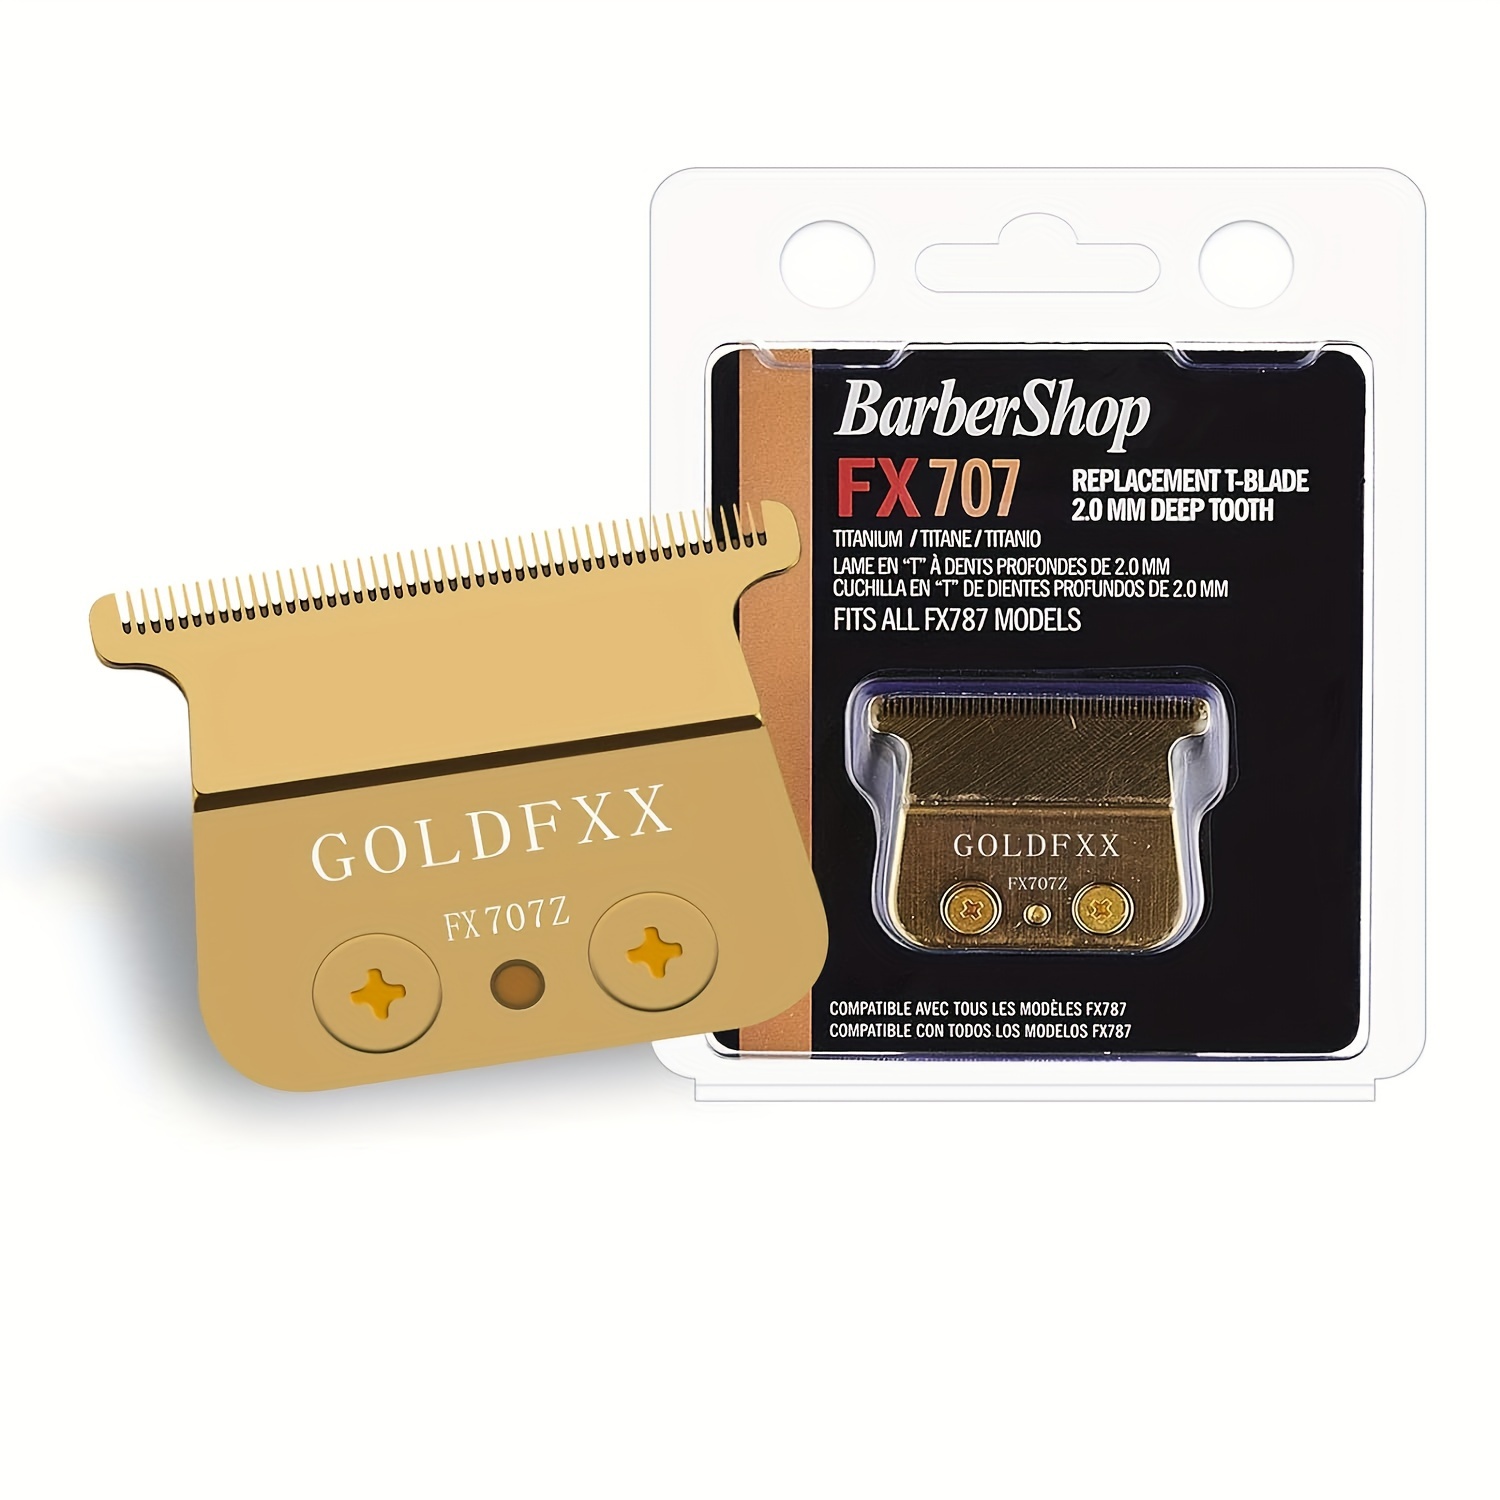 

Premium Metallic Finish Fx Replacement Blade For Trimmers - Suitable For Fx787, Fx726 & Fx707z Models - Ideal For Facial Hair Grooming